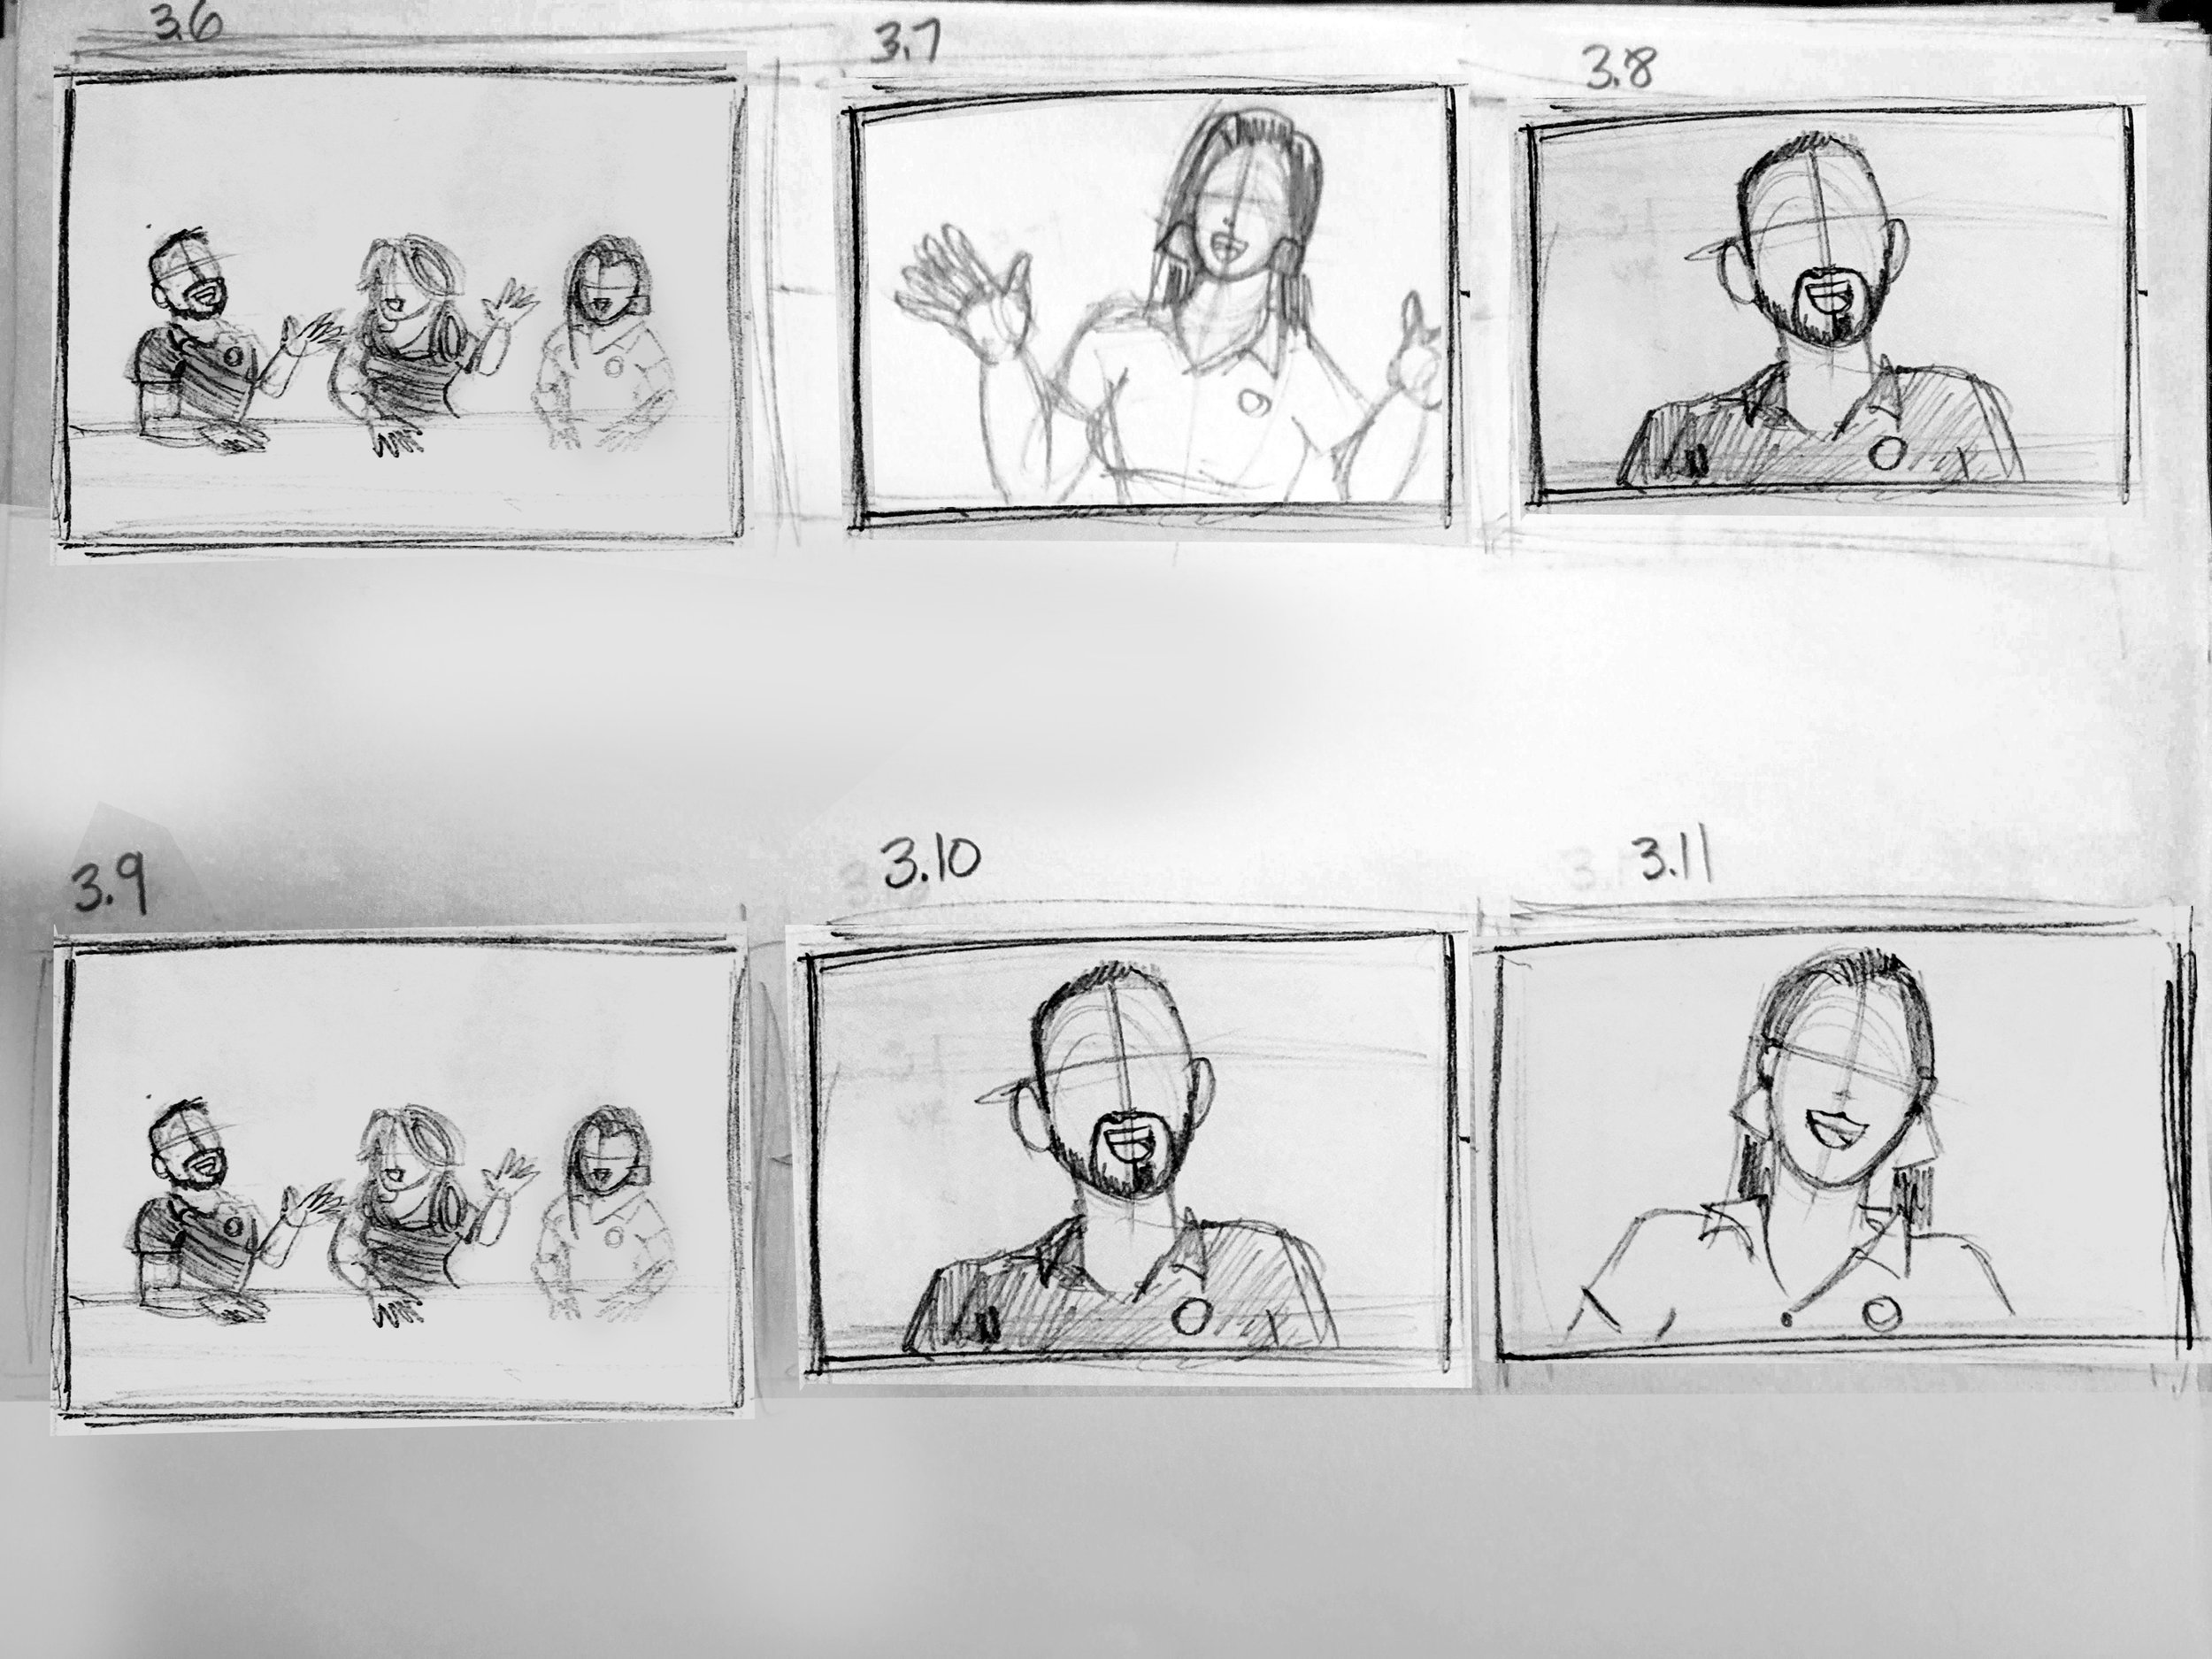 WR_Real_Suite_Eats_S1_E2_StoryBoard_Frames_3_6_to_3_11.jpg